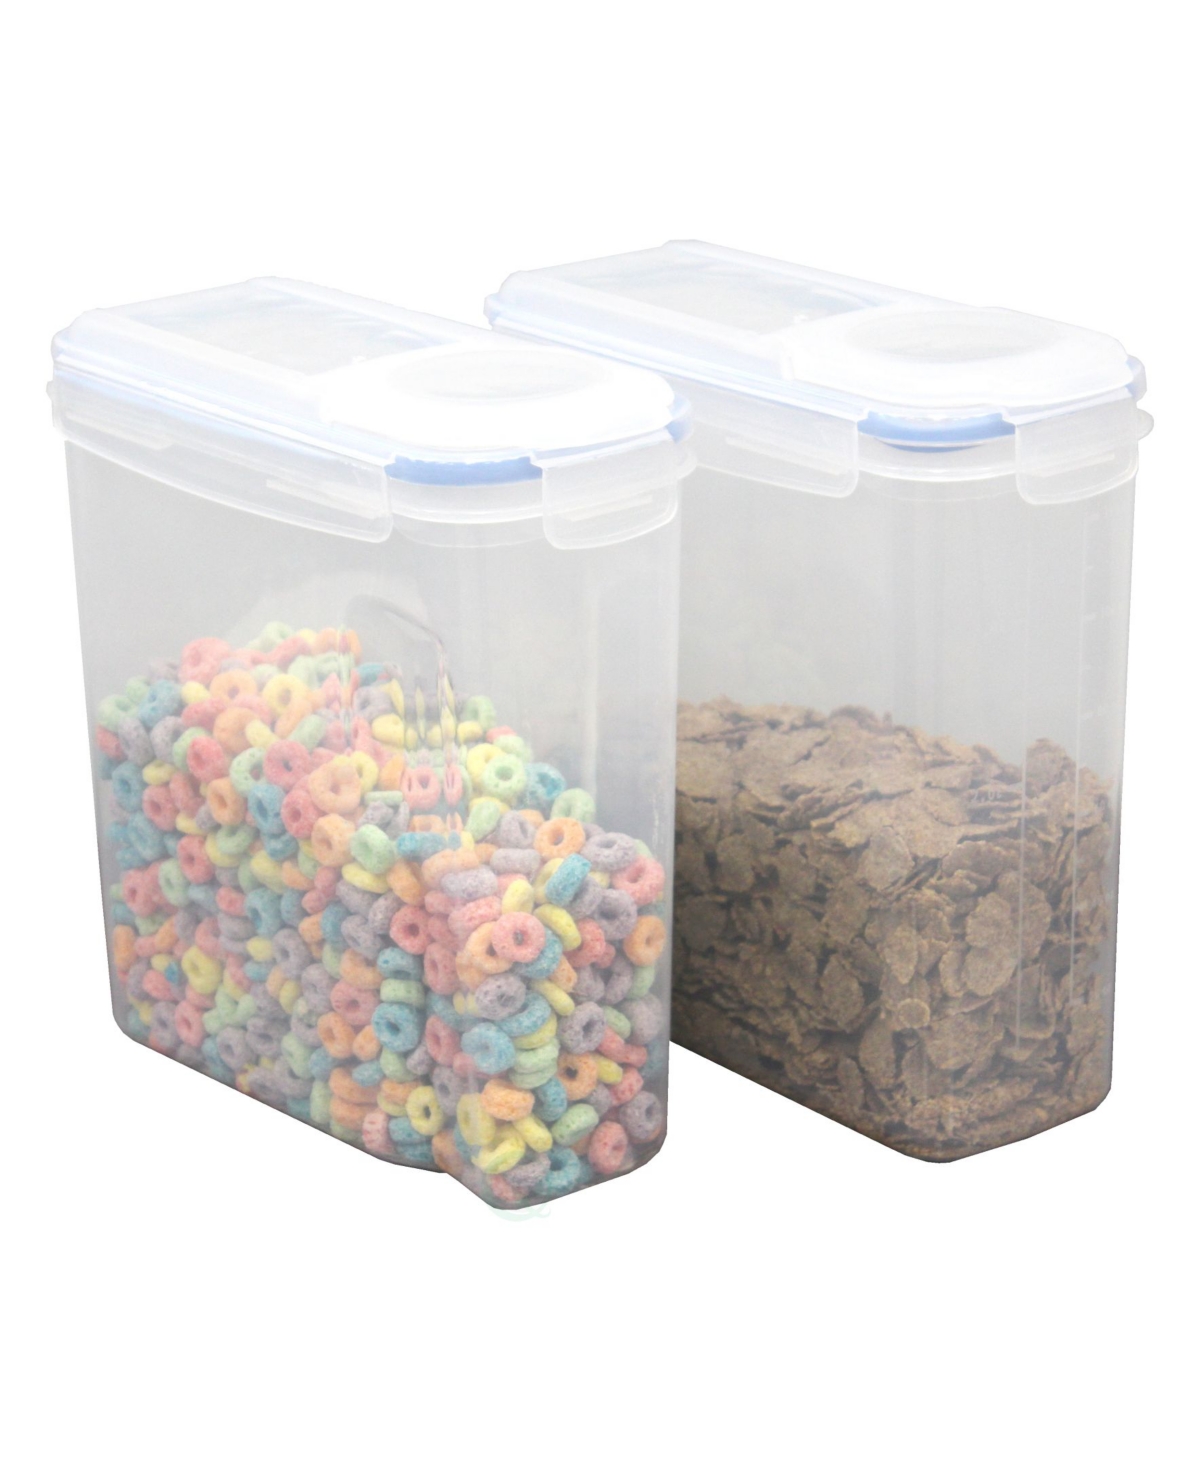 Vintiquewise Small Bpa-Free Plastic Food Cereal Containers with Airtight Spout Lid, Set of 2 - Natural